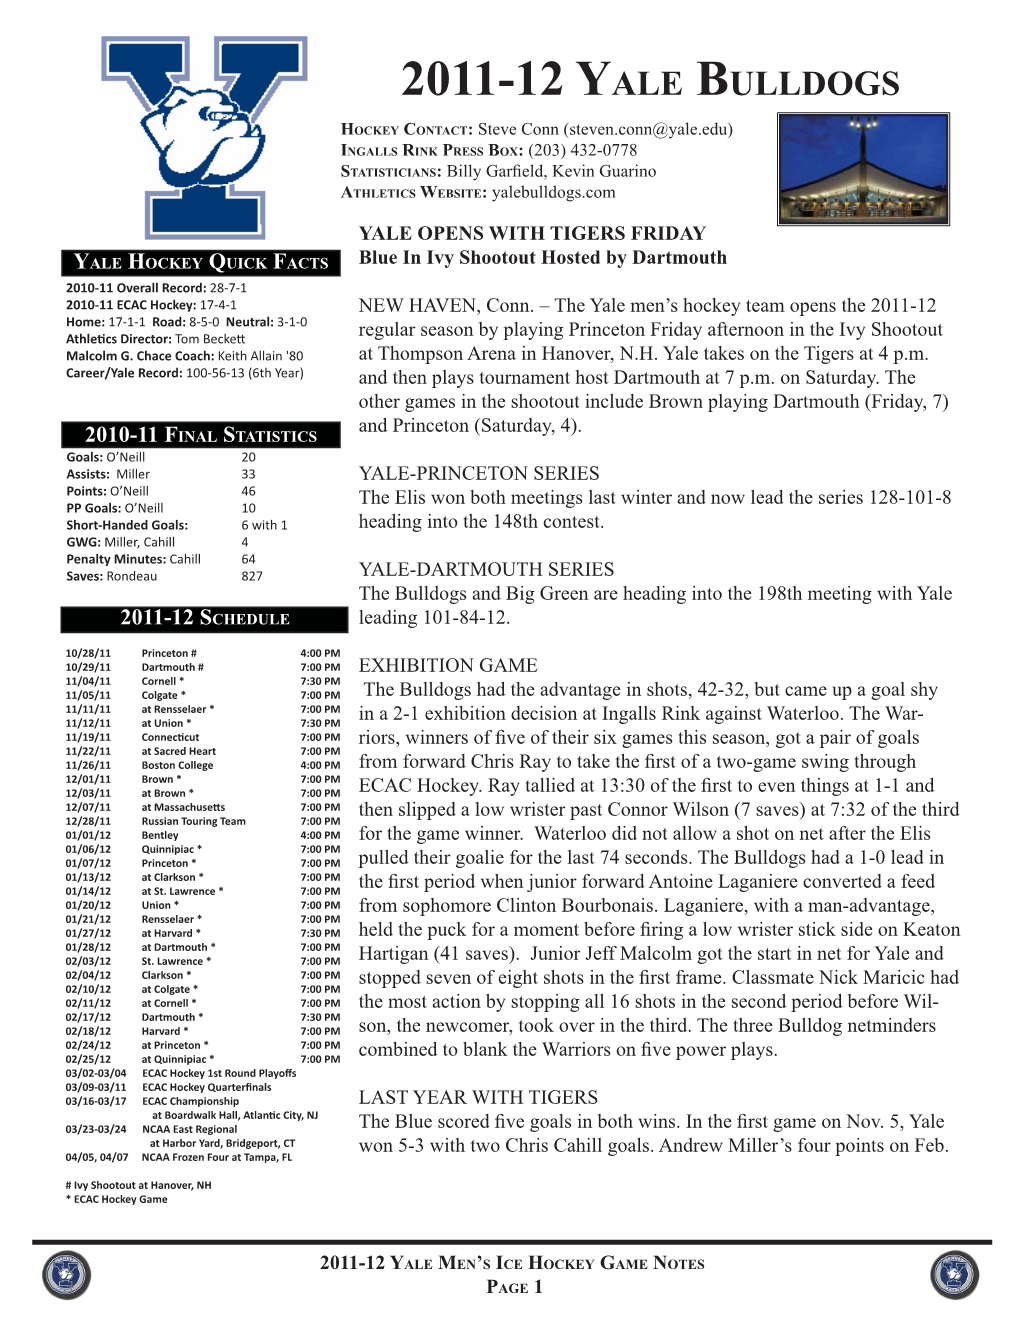 Yale Men's Hockey Game Notes (2).Indd